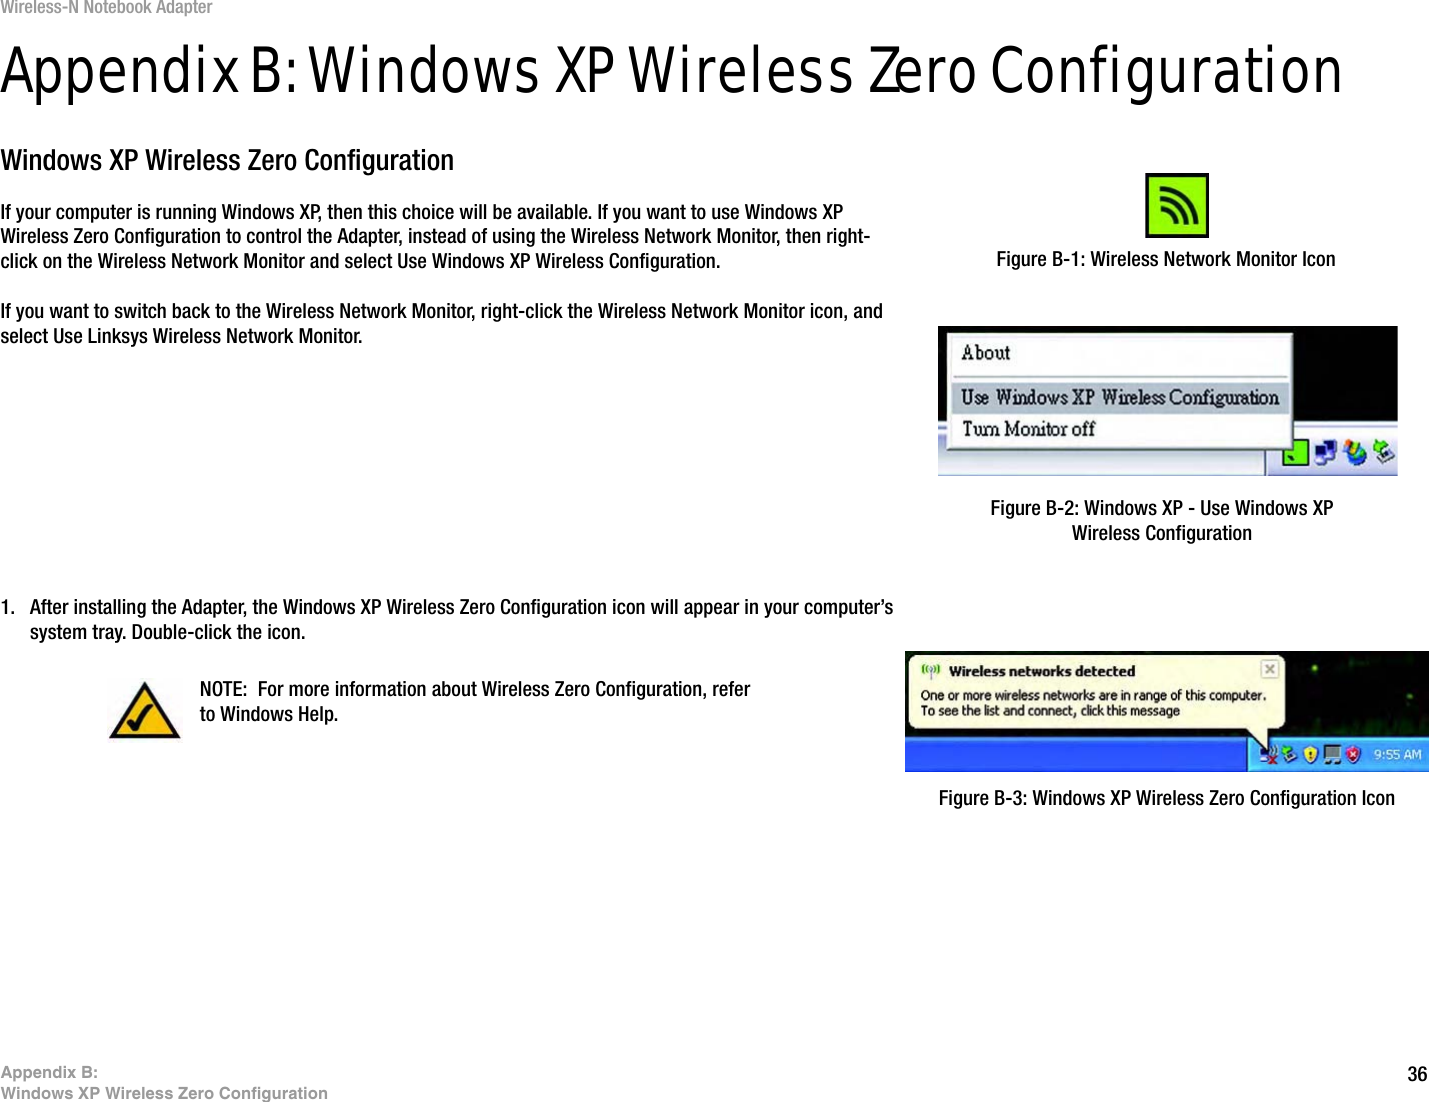 36Appendix B: Windows XP Wireless Zero ConfigurationWireless-N Notebook AdapterAppendix B: Windows XP Wireless Zero ConfigurationWindows XP Wireless Zero ConfigurationIf your computer is running Windows XP, then this choice will be available. If you want to use Windows XP Wireless Zero Configuration to control the Adapter, instead of using the Wireless Network Monitor, then right-click on the Wireless Network Monitor and select Use Windows XP Wireless Configuration. If you want to switch back to the Wireless Network Monitor, right-click the Wireless Network Monitor icon, and select Use Linksys Wireless Network Monitor.1. After installing the Adapter, the Windows XP Wireless Zero Configuration icon will appear in your computer’s system tray. Double-click the icon. Figure B-1: Wireless Network Monitor IconFigure B-2: Windows XP - Use Windows XP Wireless ConfigurationNOTE: For more information about Wireless Zero Configuration, refer to Windows Help.Figure B-3: Windows XP Wireless Zero Configuration Icon